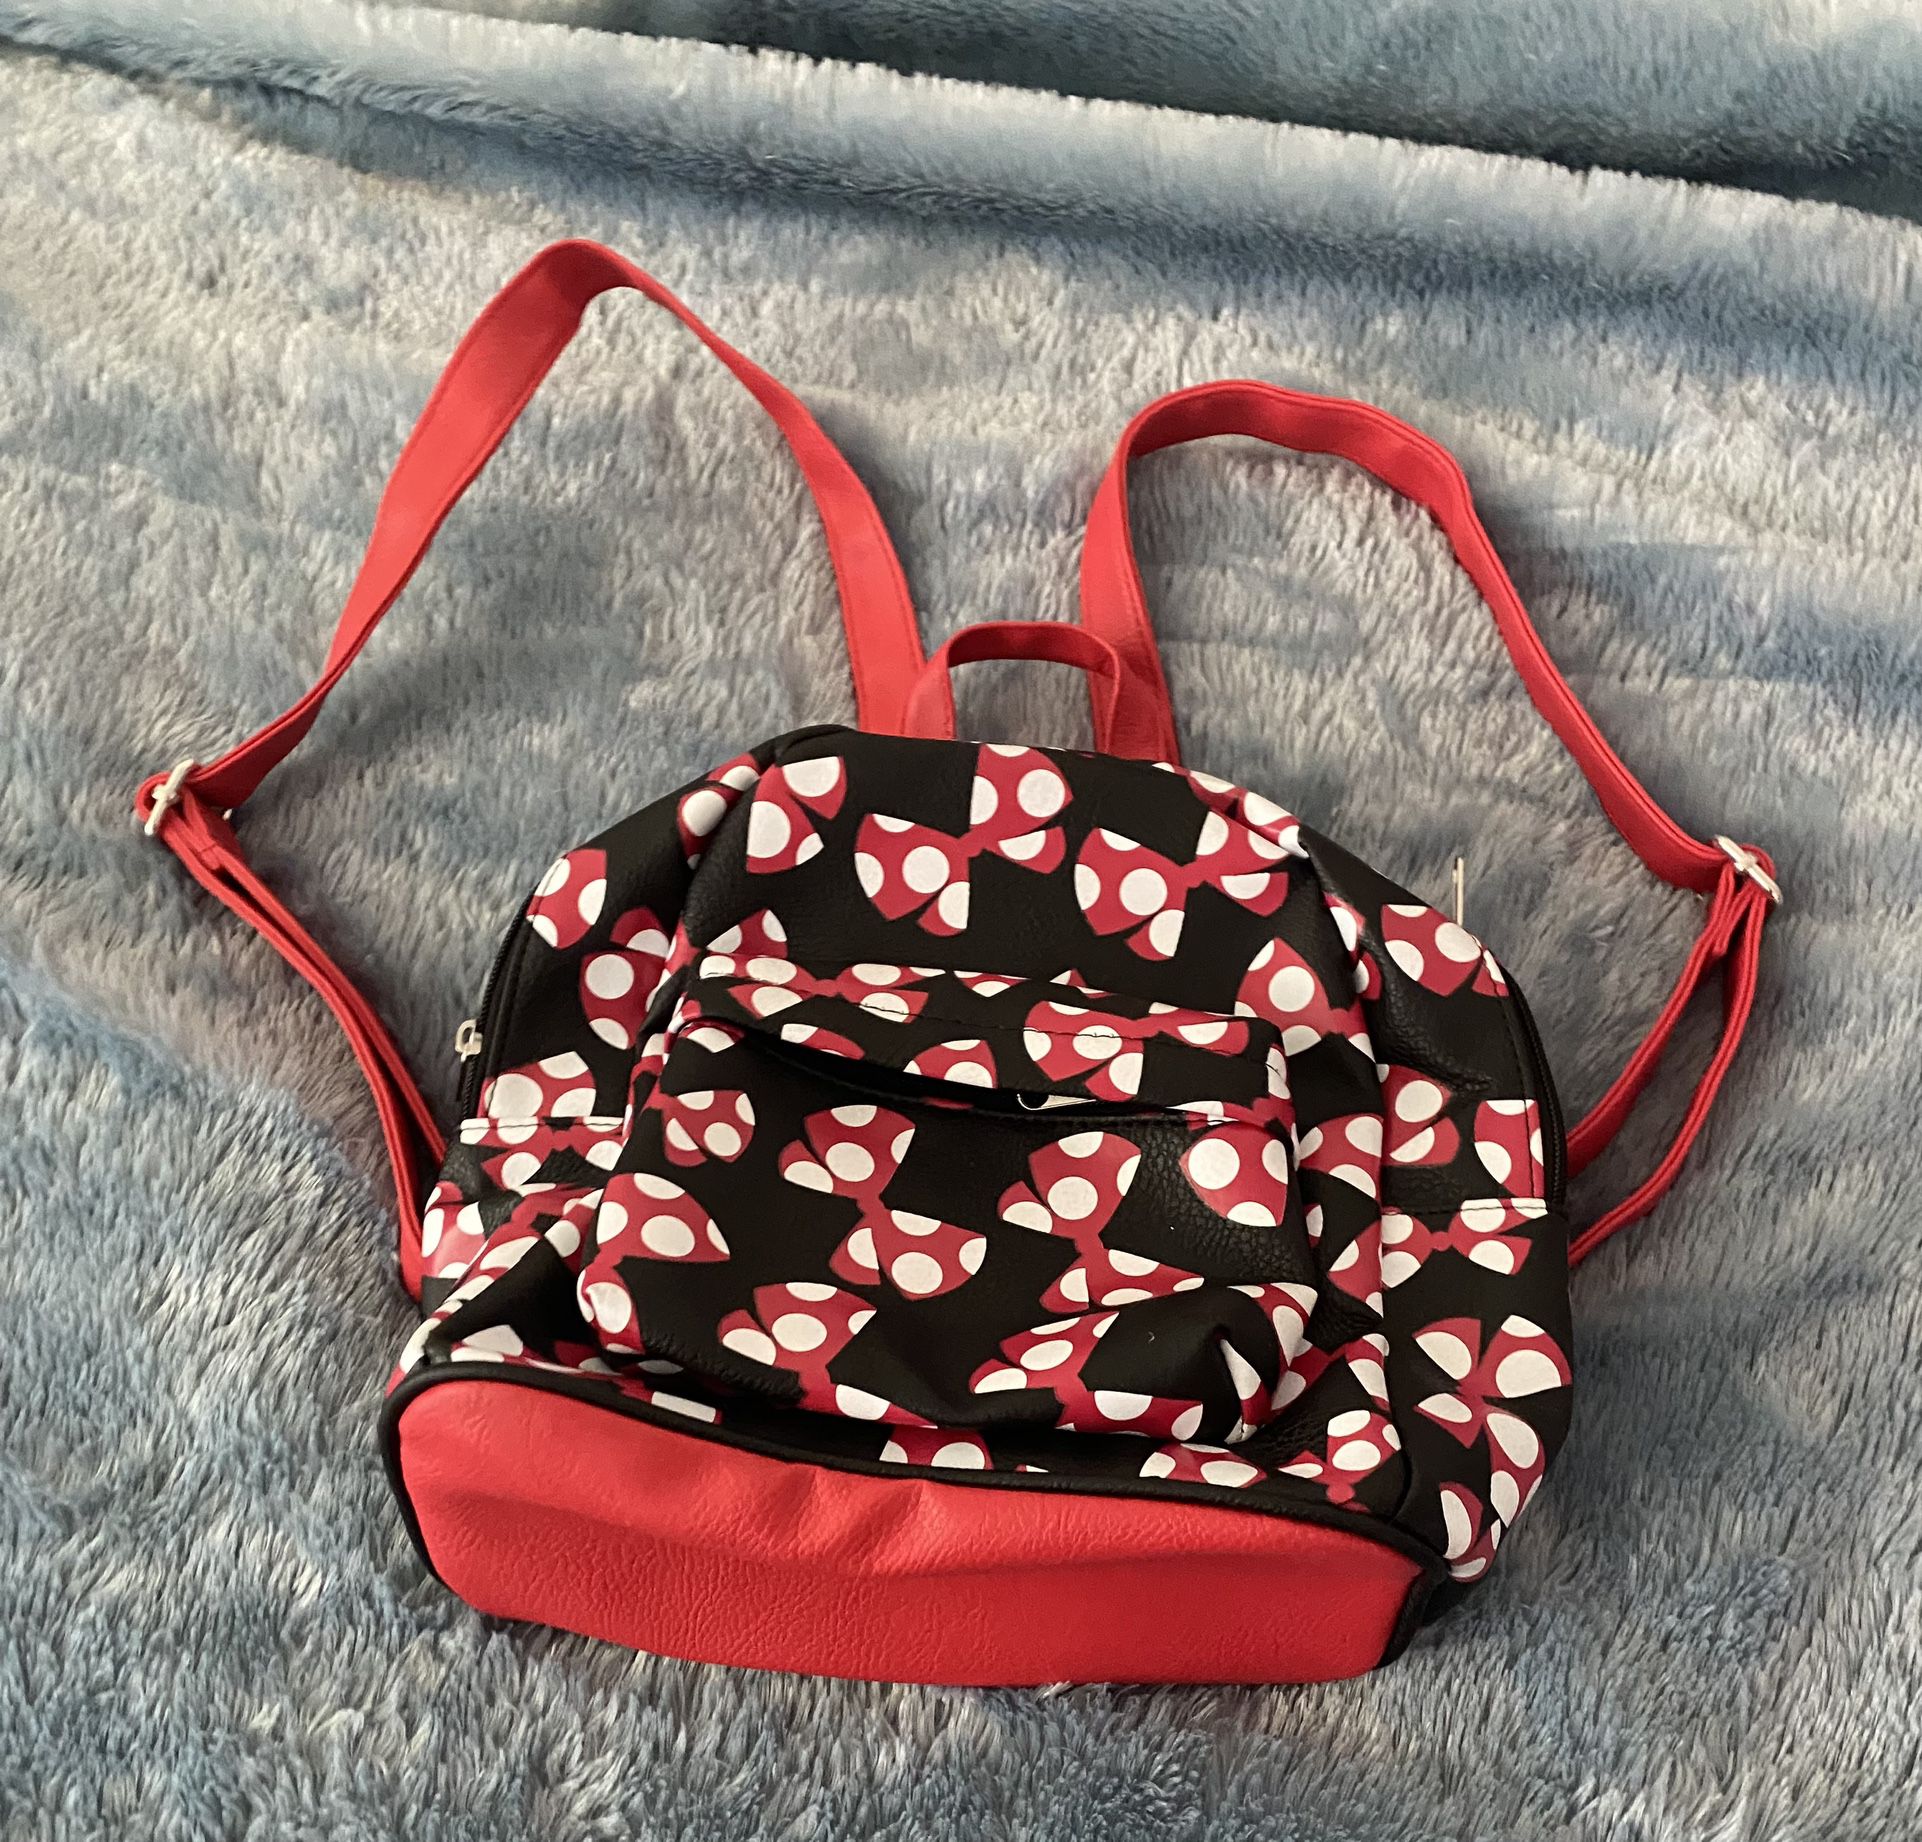 Disney Minnie Mouse Bow mini Backpack NEW